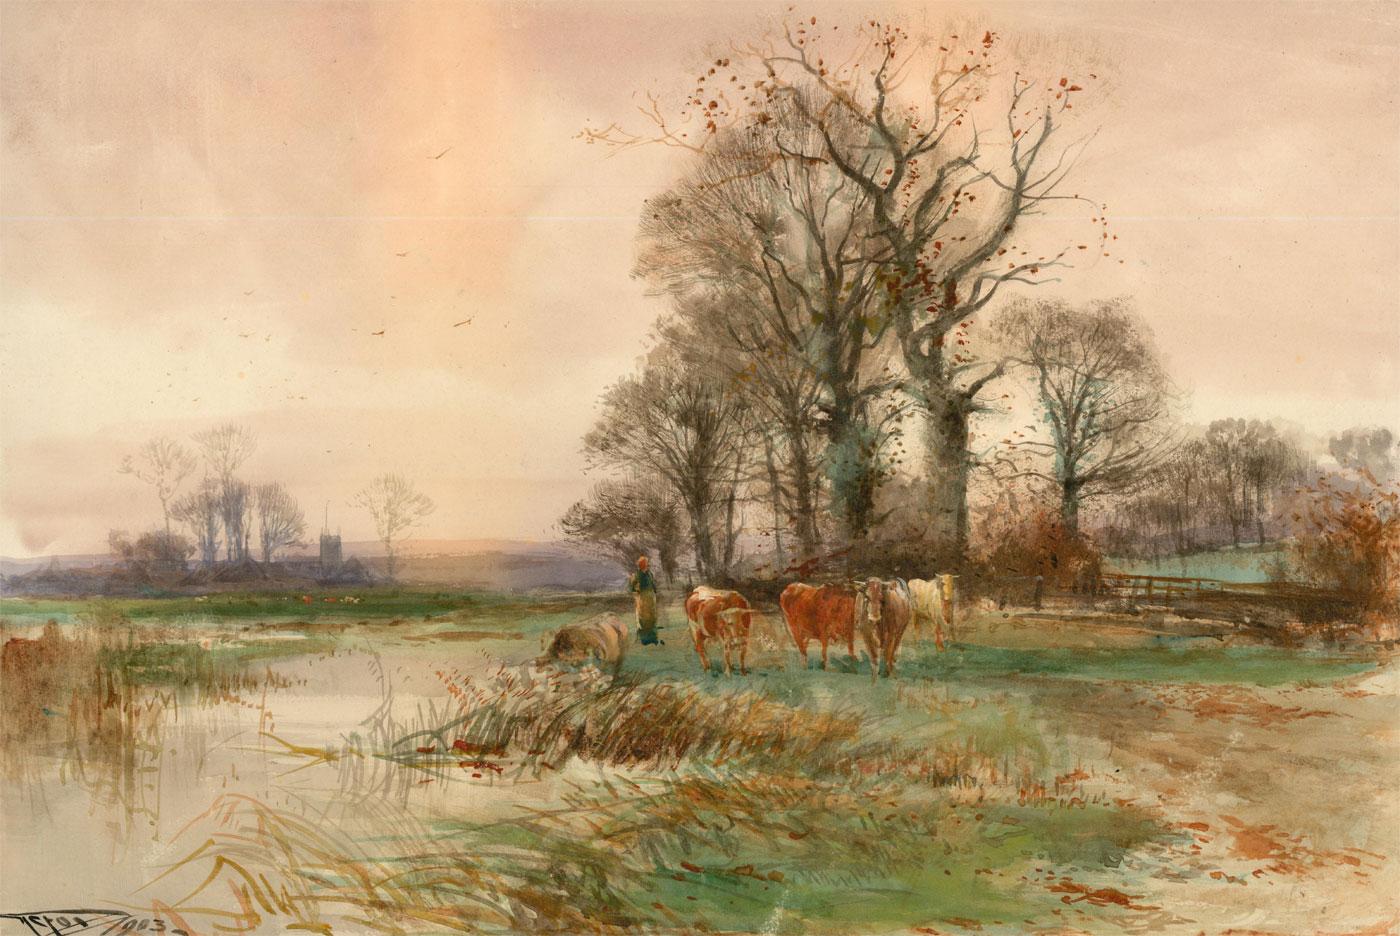 An evocative watercolour by the well-listed artist Henry Charles Fox (1860-1929) depicting the village of Roxton on the Ouse, Bedfordshire, England. A group of cattle can be seen meandering across a riverbank near a figure at dusk. Signed and dated